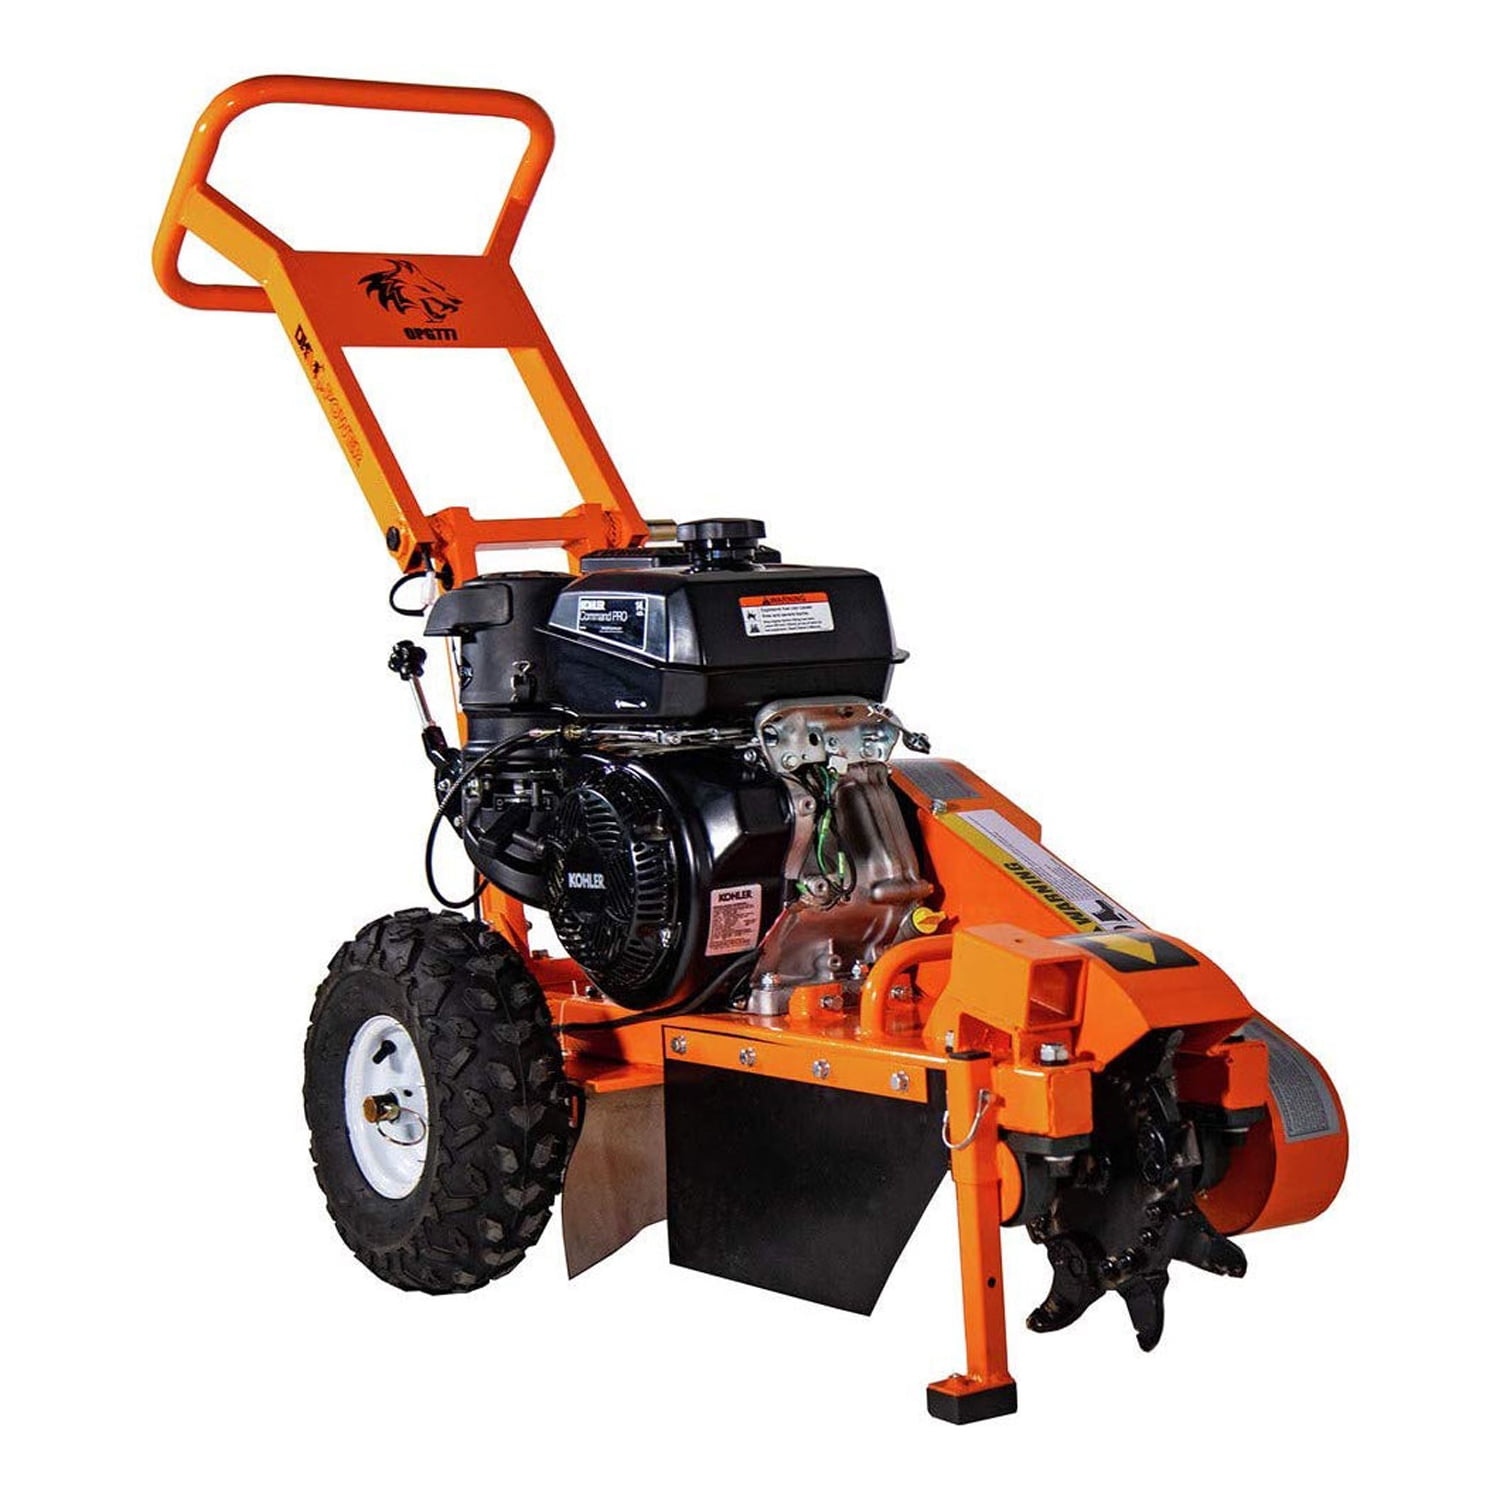 Opg777 12 X 3.5 In. 14hp Stump Grinder With Kohler Ch440 Command Pro Commercial Gas Engine